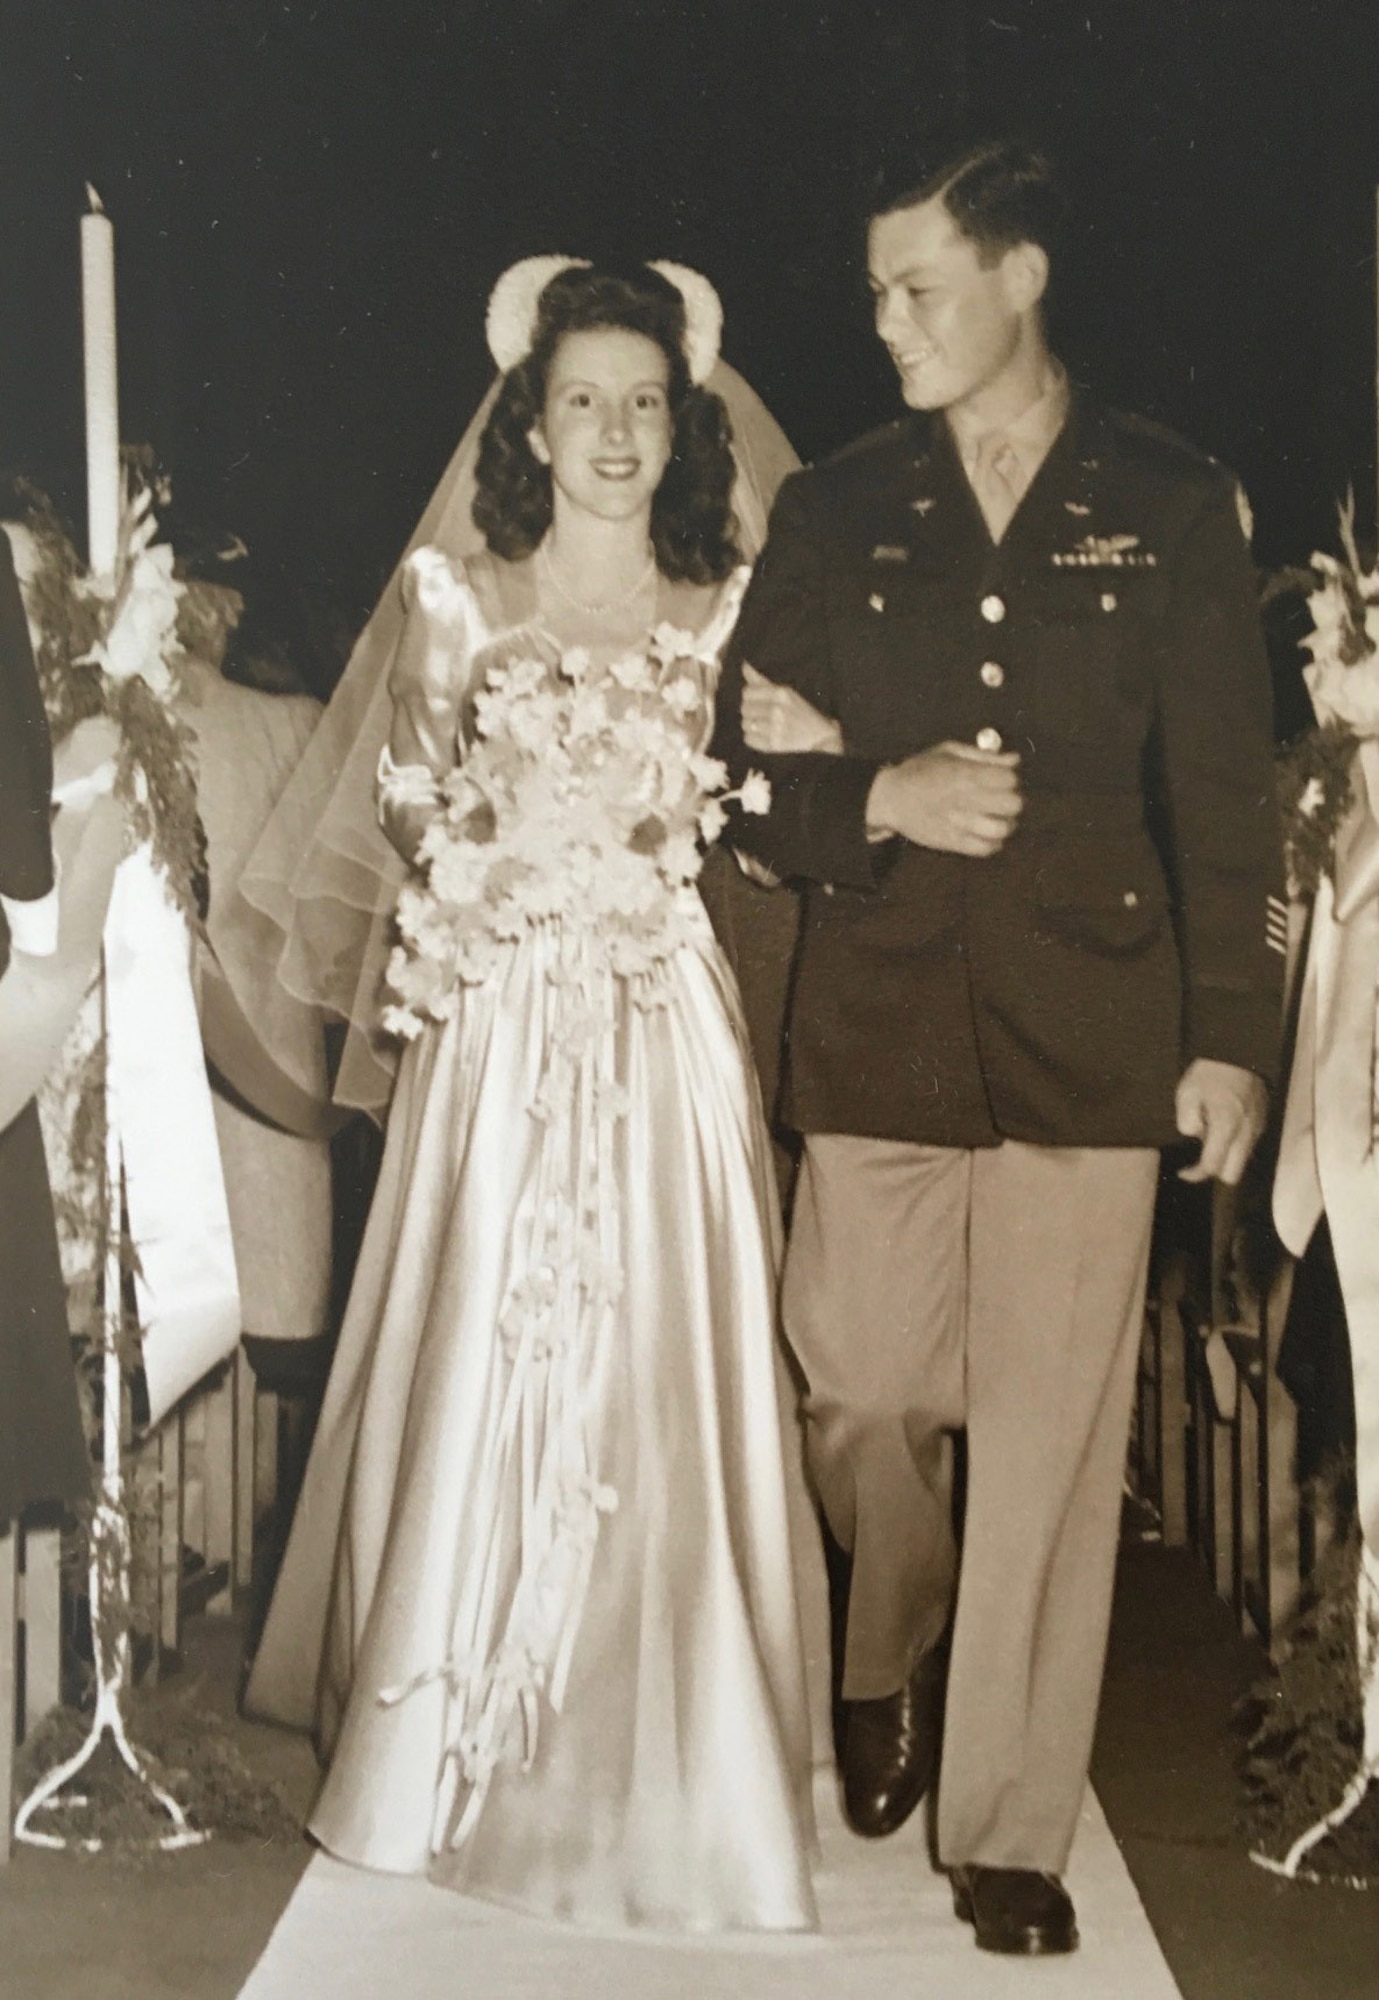 Barbara and 1st Lt. Robert “Bob” Wolff walk down the aisle after getting married July 8, 1945, in California. Wolff was a B-17 Flying Fortress pilot with the 100th Bomb Group, Thorpe Abbotts, England, during World War II, and kept as a prisoner-of-war at Stalag Luft III, Germany, for approximately 18 months. He and Barb married a few months after he returned home to California, and are still together 77 years later. (Photo courtesy of Nancy Phelps and Bob Wolff)